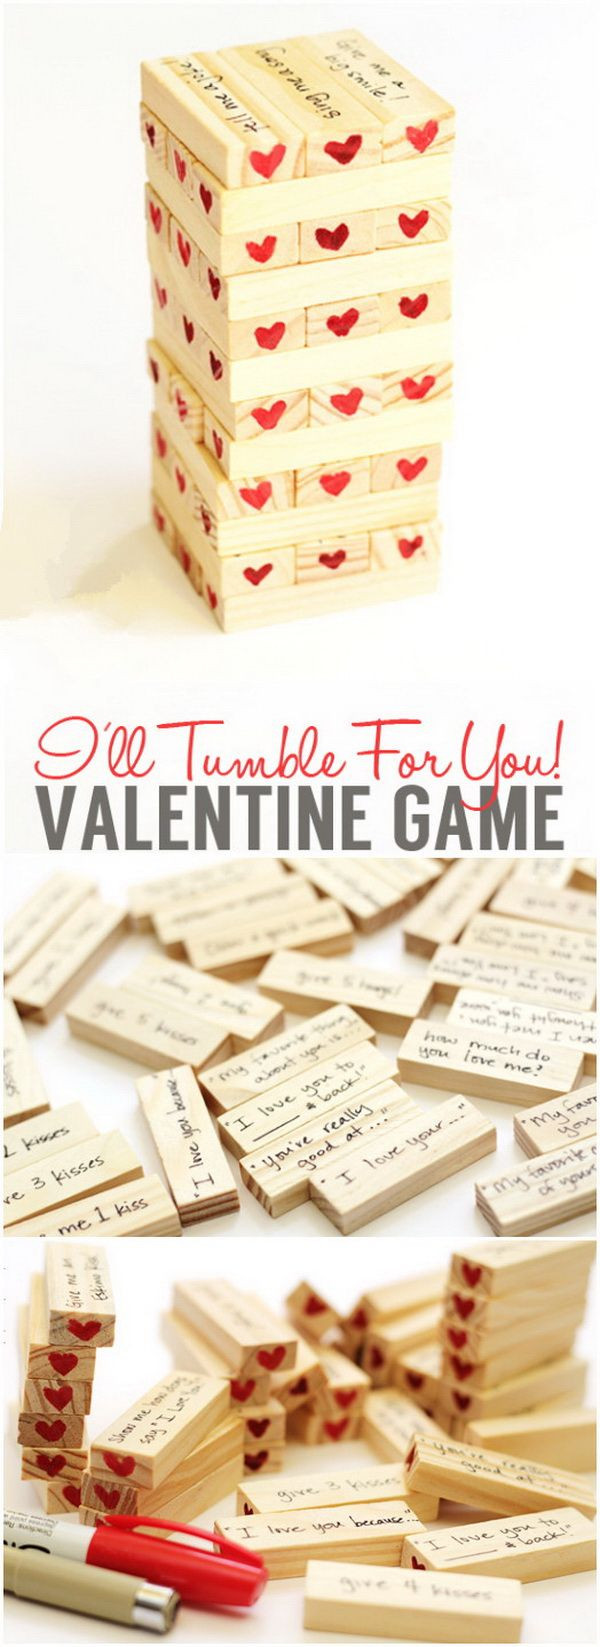 Valentines Day Gift Ideas For Boyfriends
 Valentine’s Day Hearty Tumble Game Another fun t idea